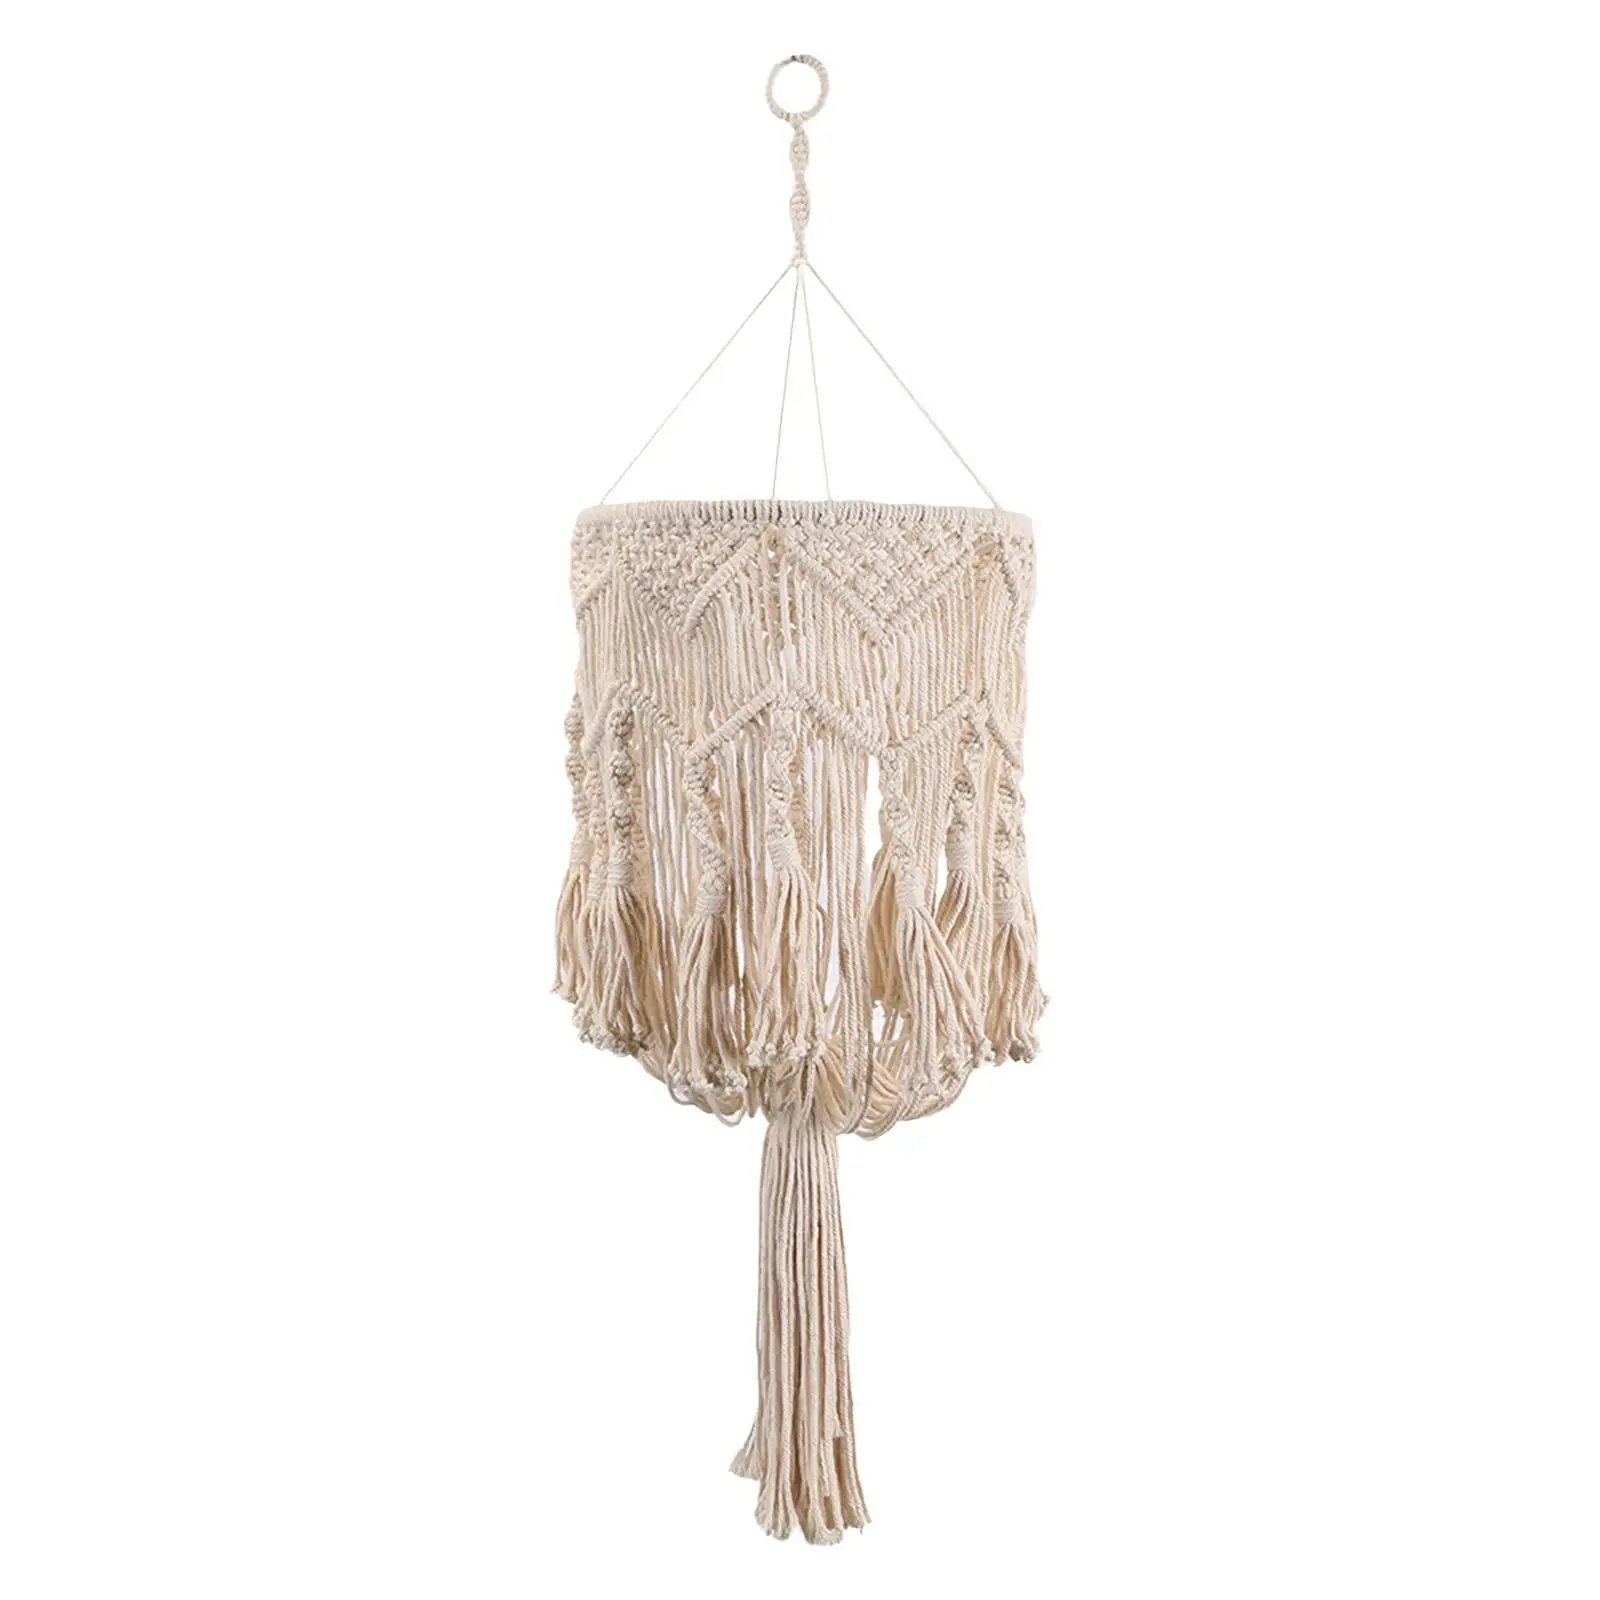 Nordic Macrame Lamp Shade Bohemian Ceiling Light Cover Woven Hanging Lampshade for Living Room Bedroom Wedding Party Decor